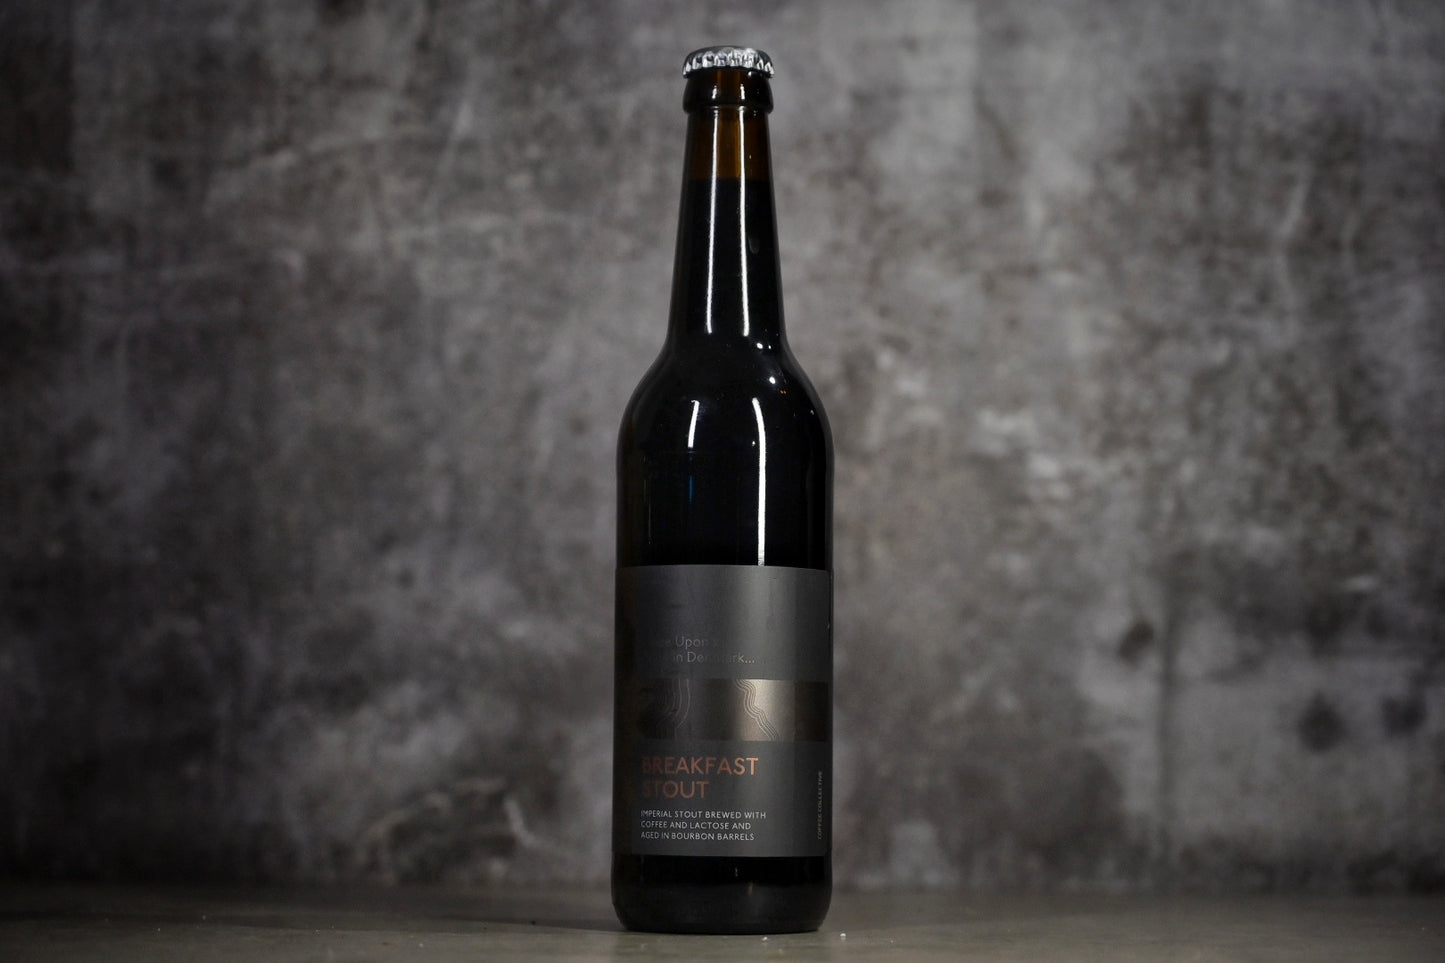 Hill Farmstead - Once Upon a Time in Denmark… Breakfast Stout